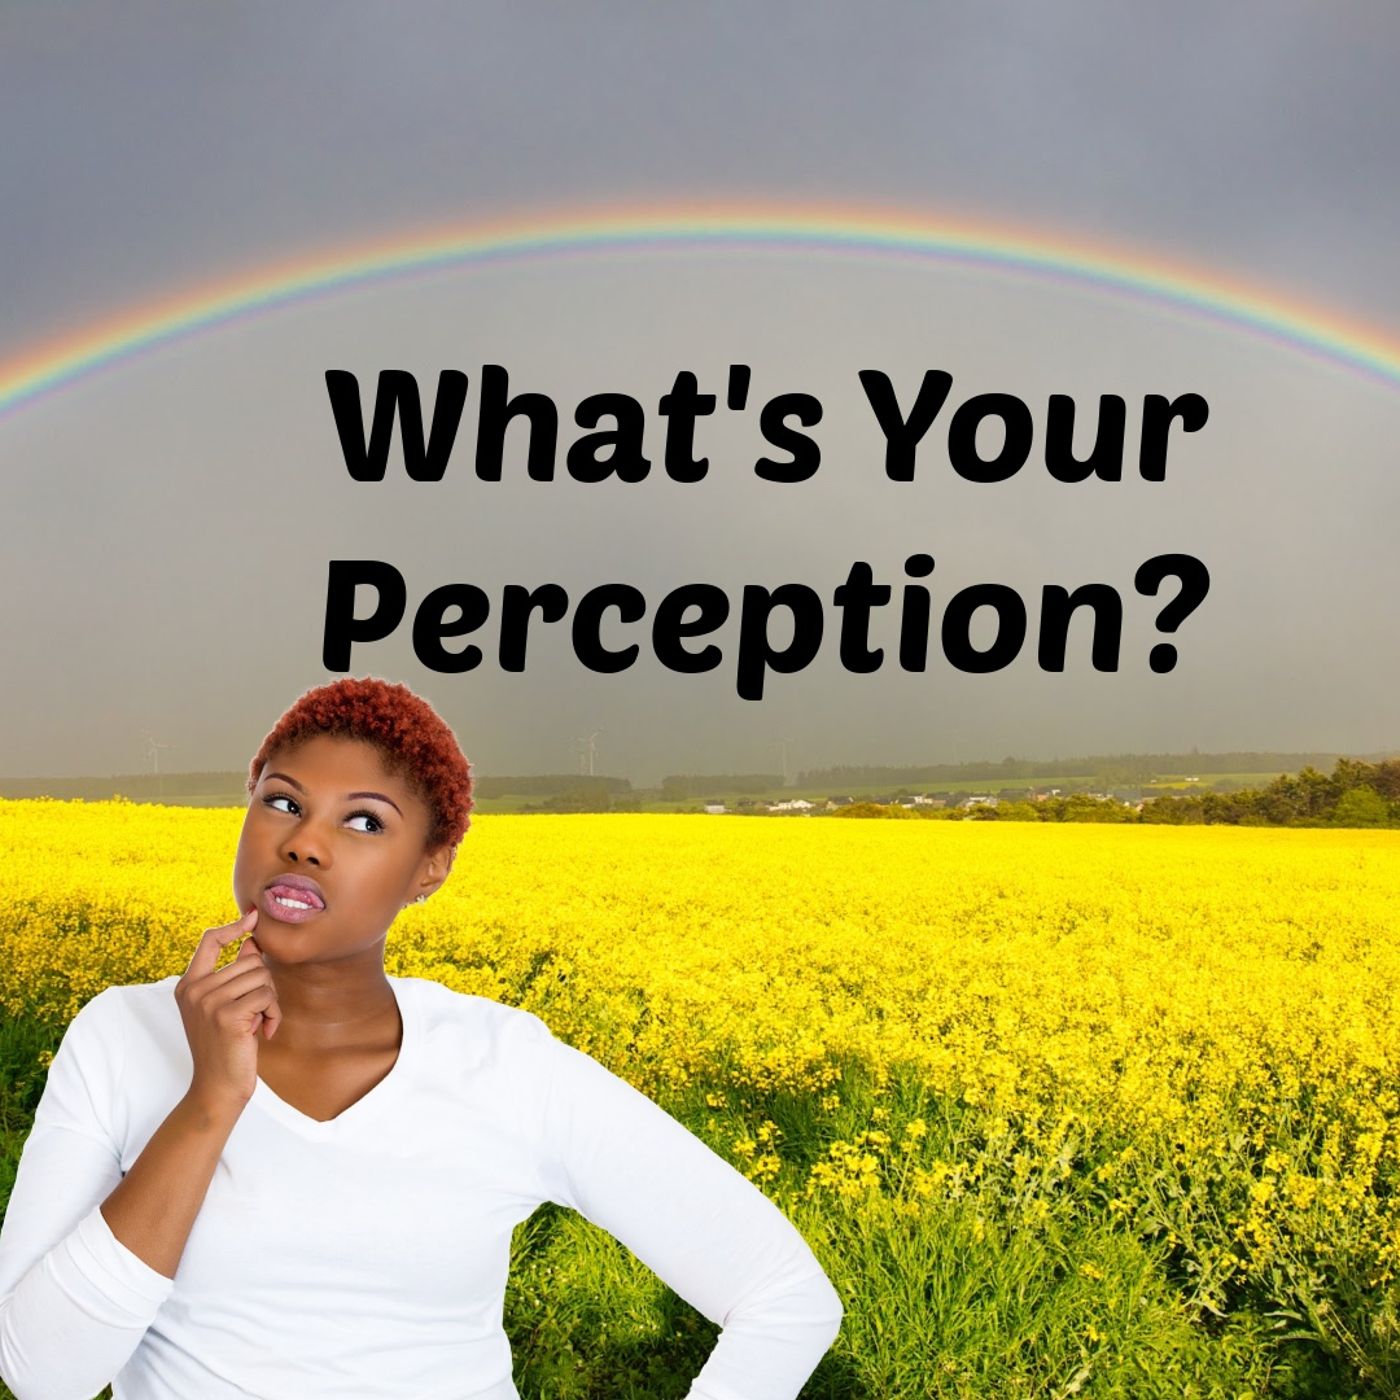 What's Your Perception?